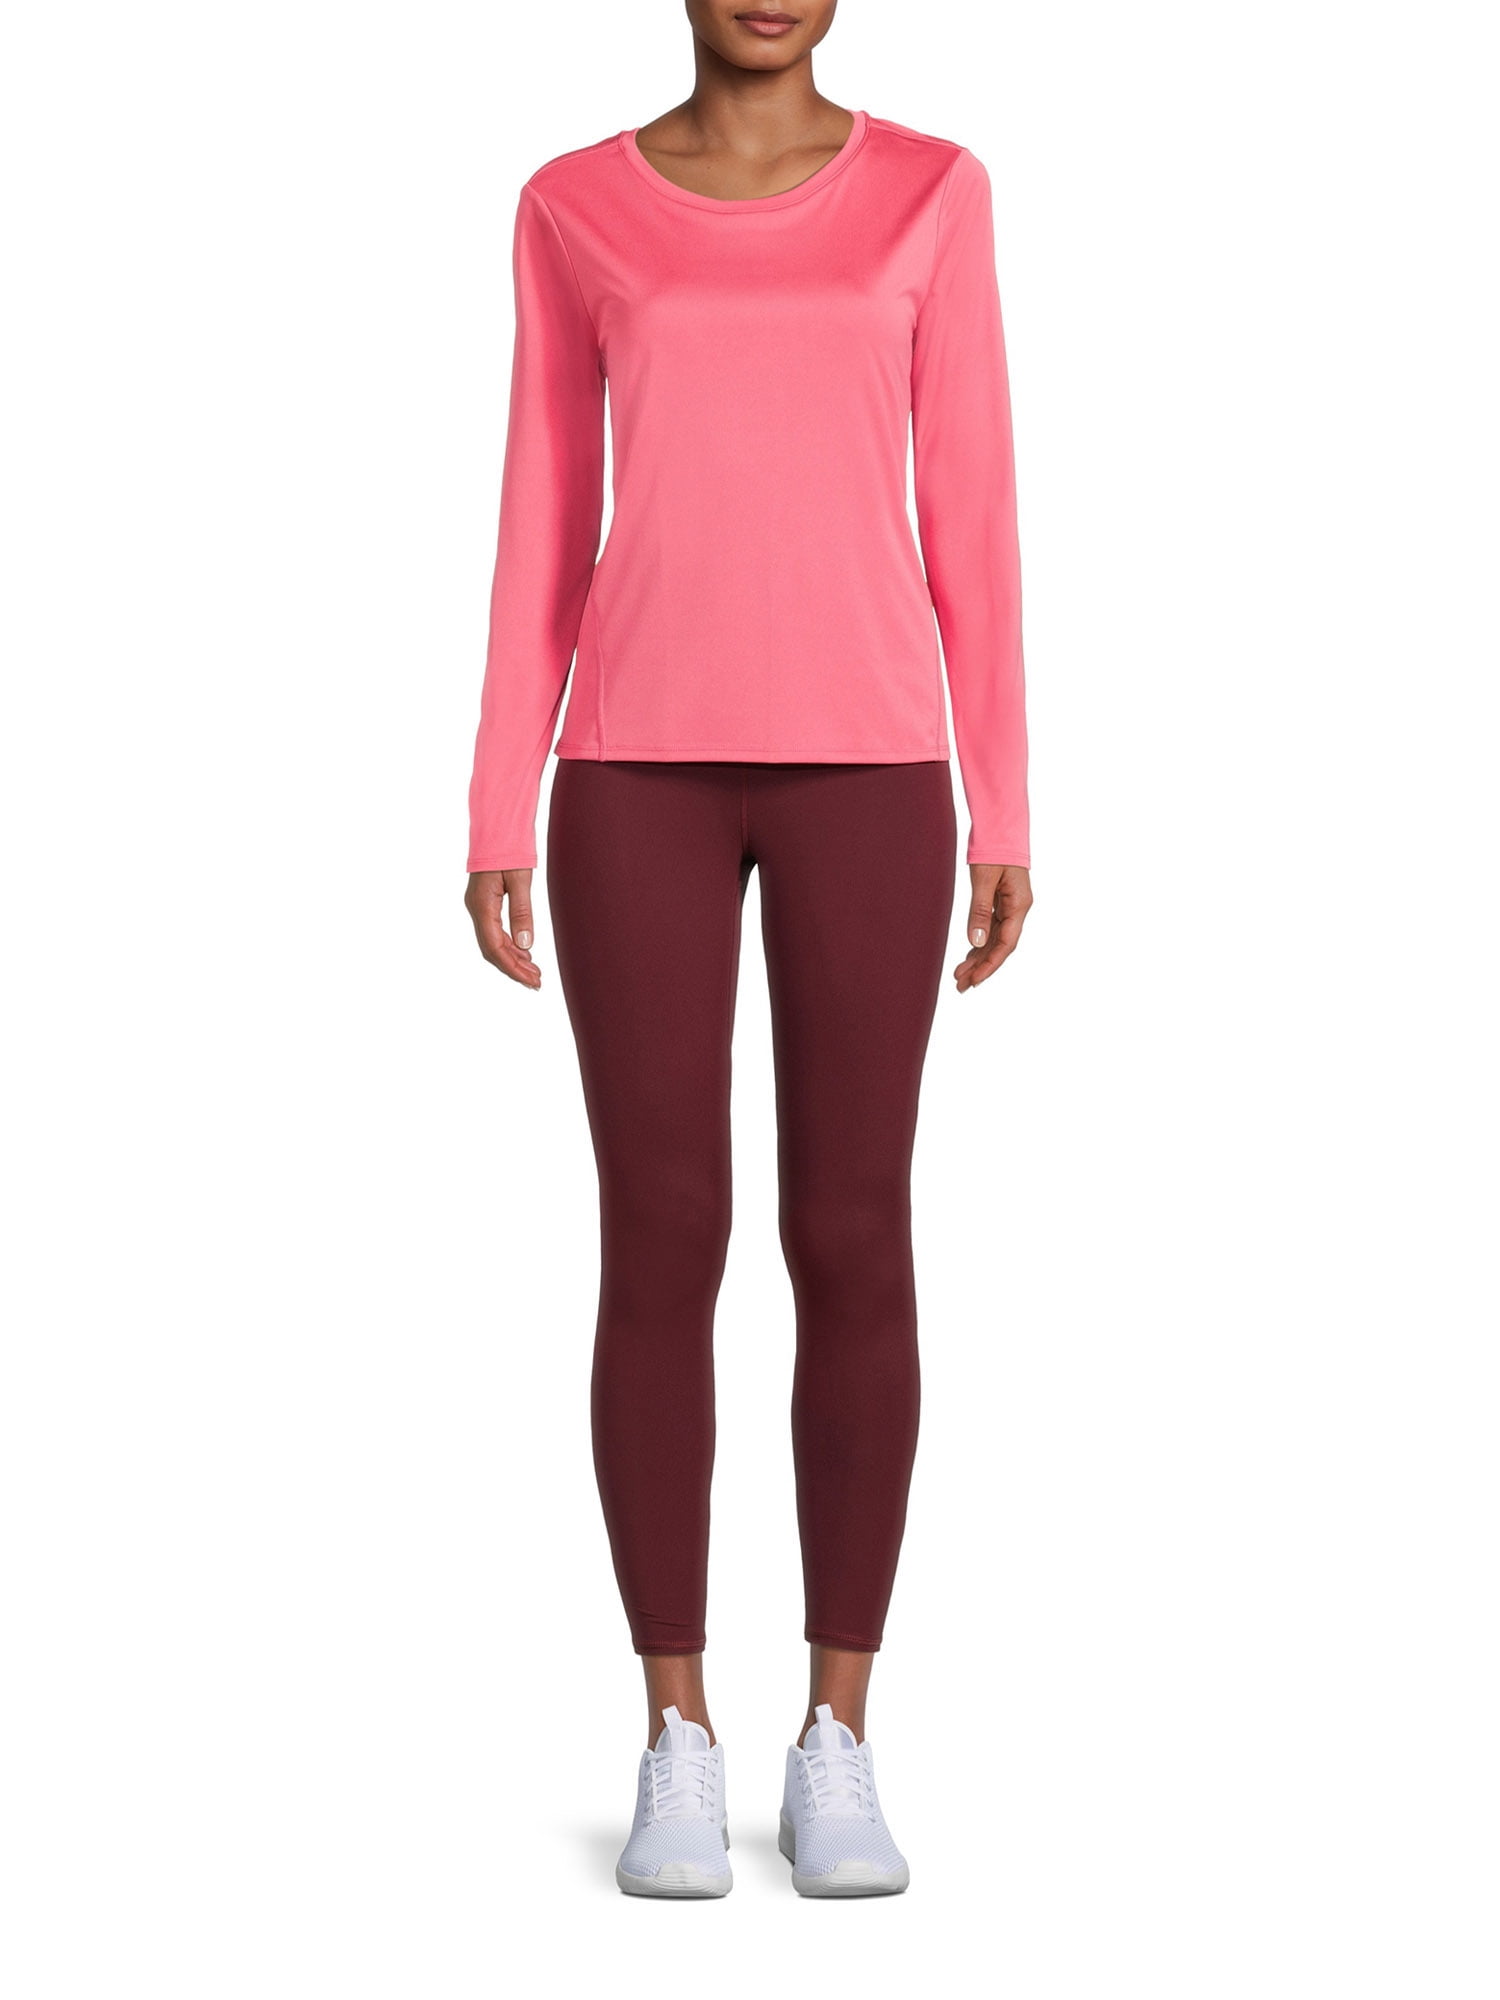 Three-piece Long Sleeve Active Wear Set at Rs 3950, Women Sports Wear